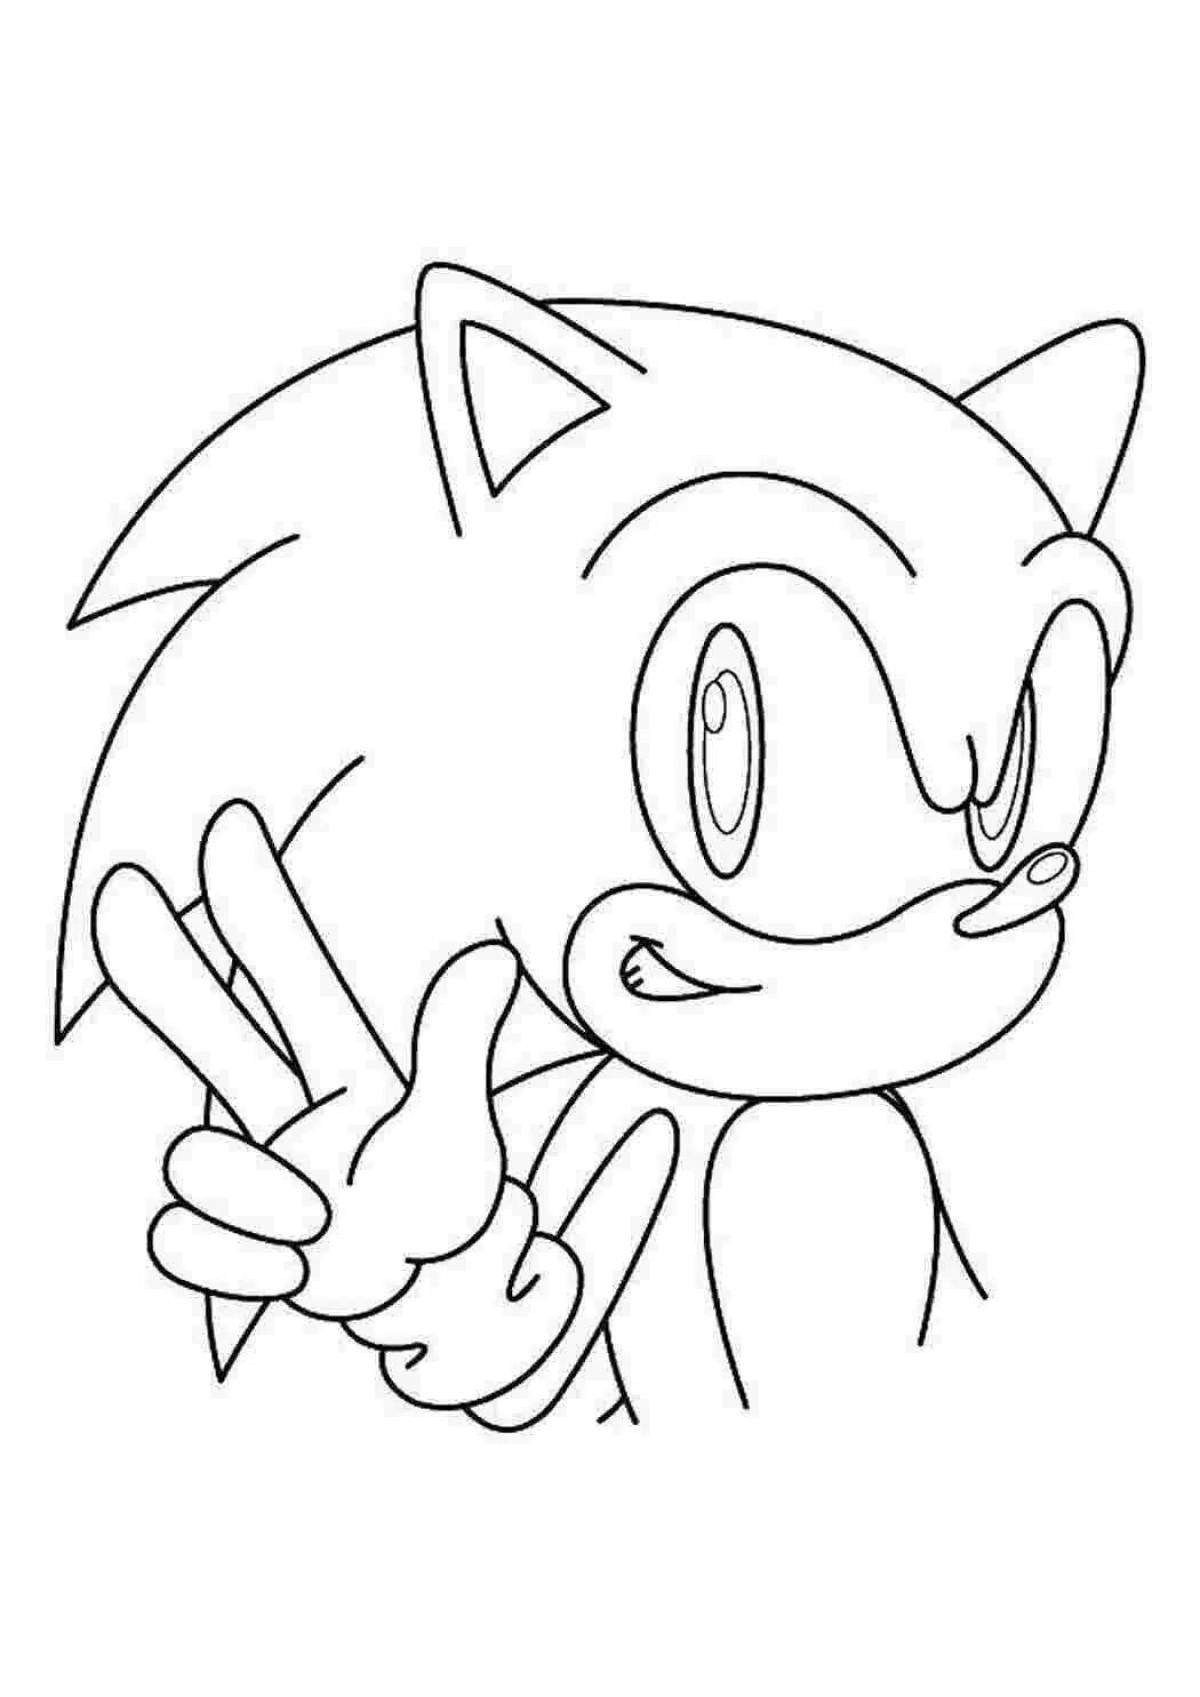 Great sonic light coloring book